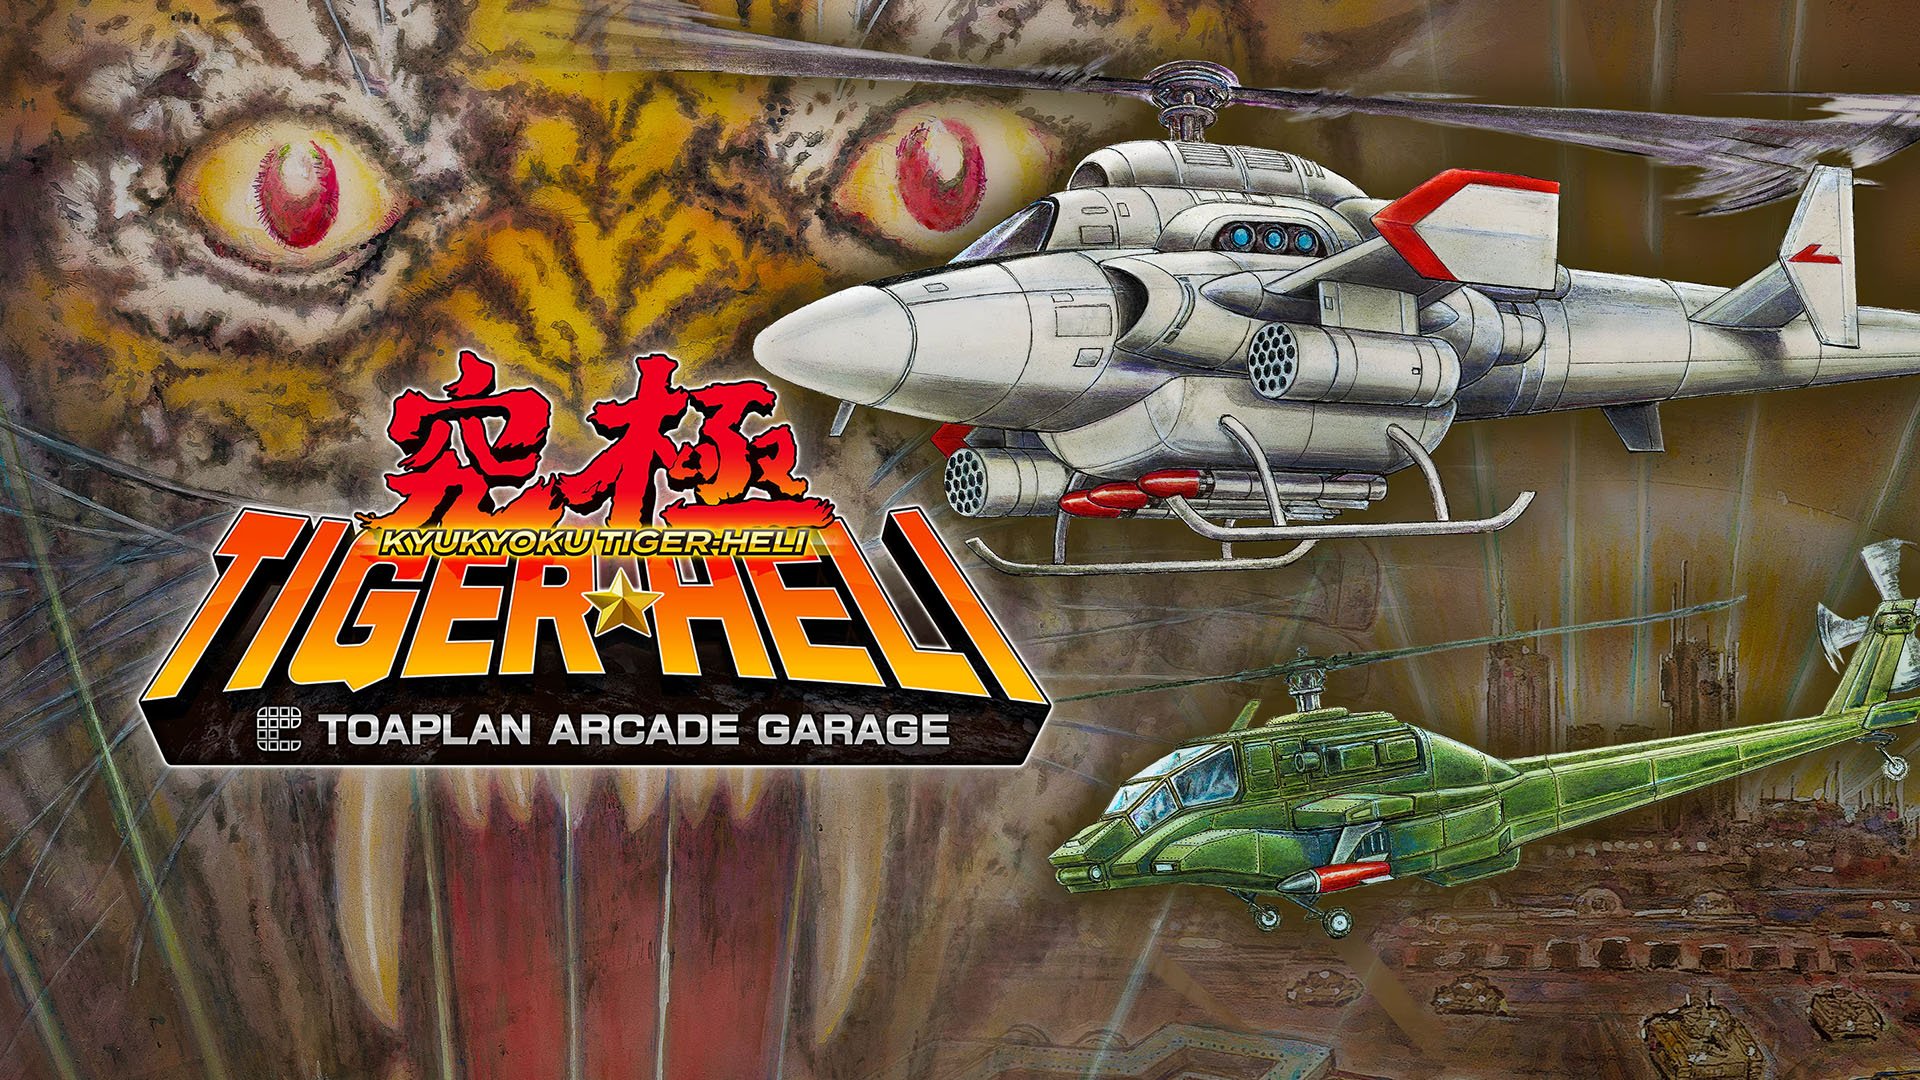 #
      Kyukyoku Tiger-Heli: Toaplan Game Garage now available in North America